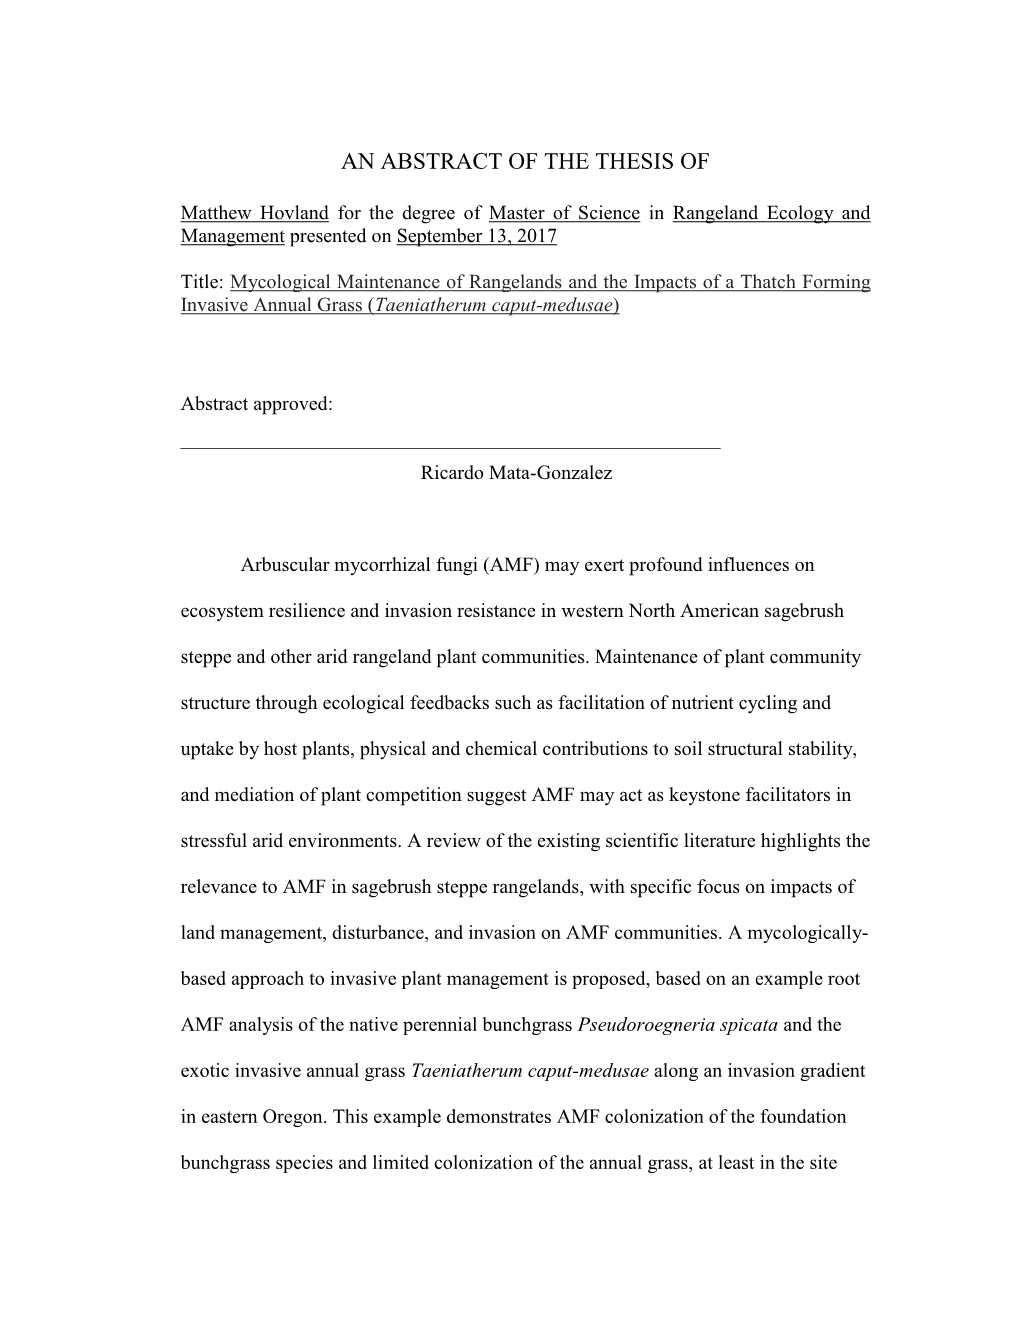 An Abstract of the Thesis Of